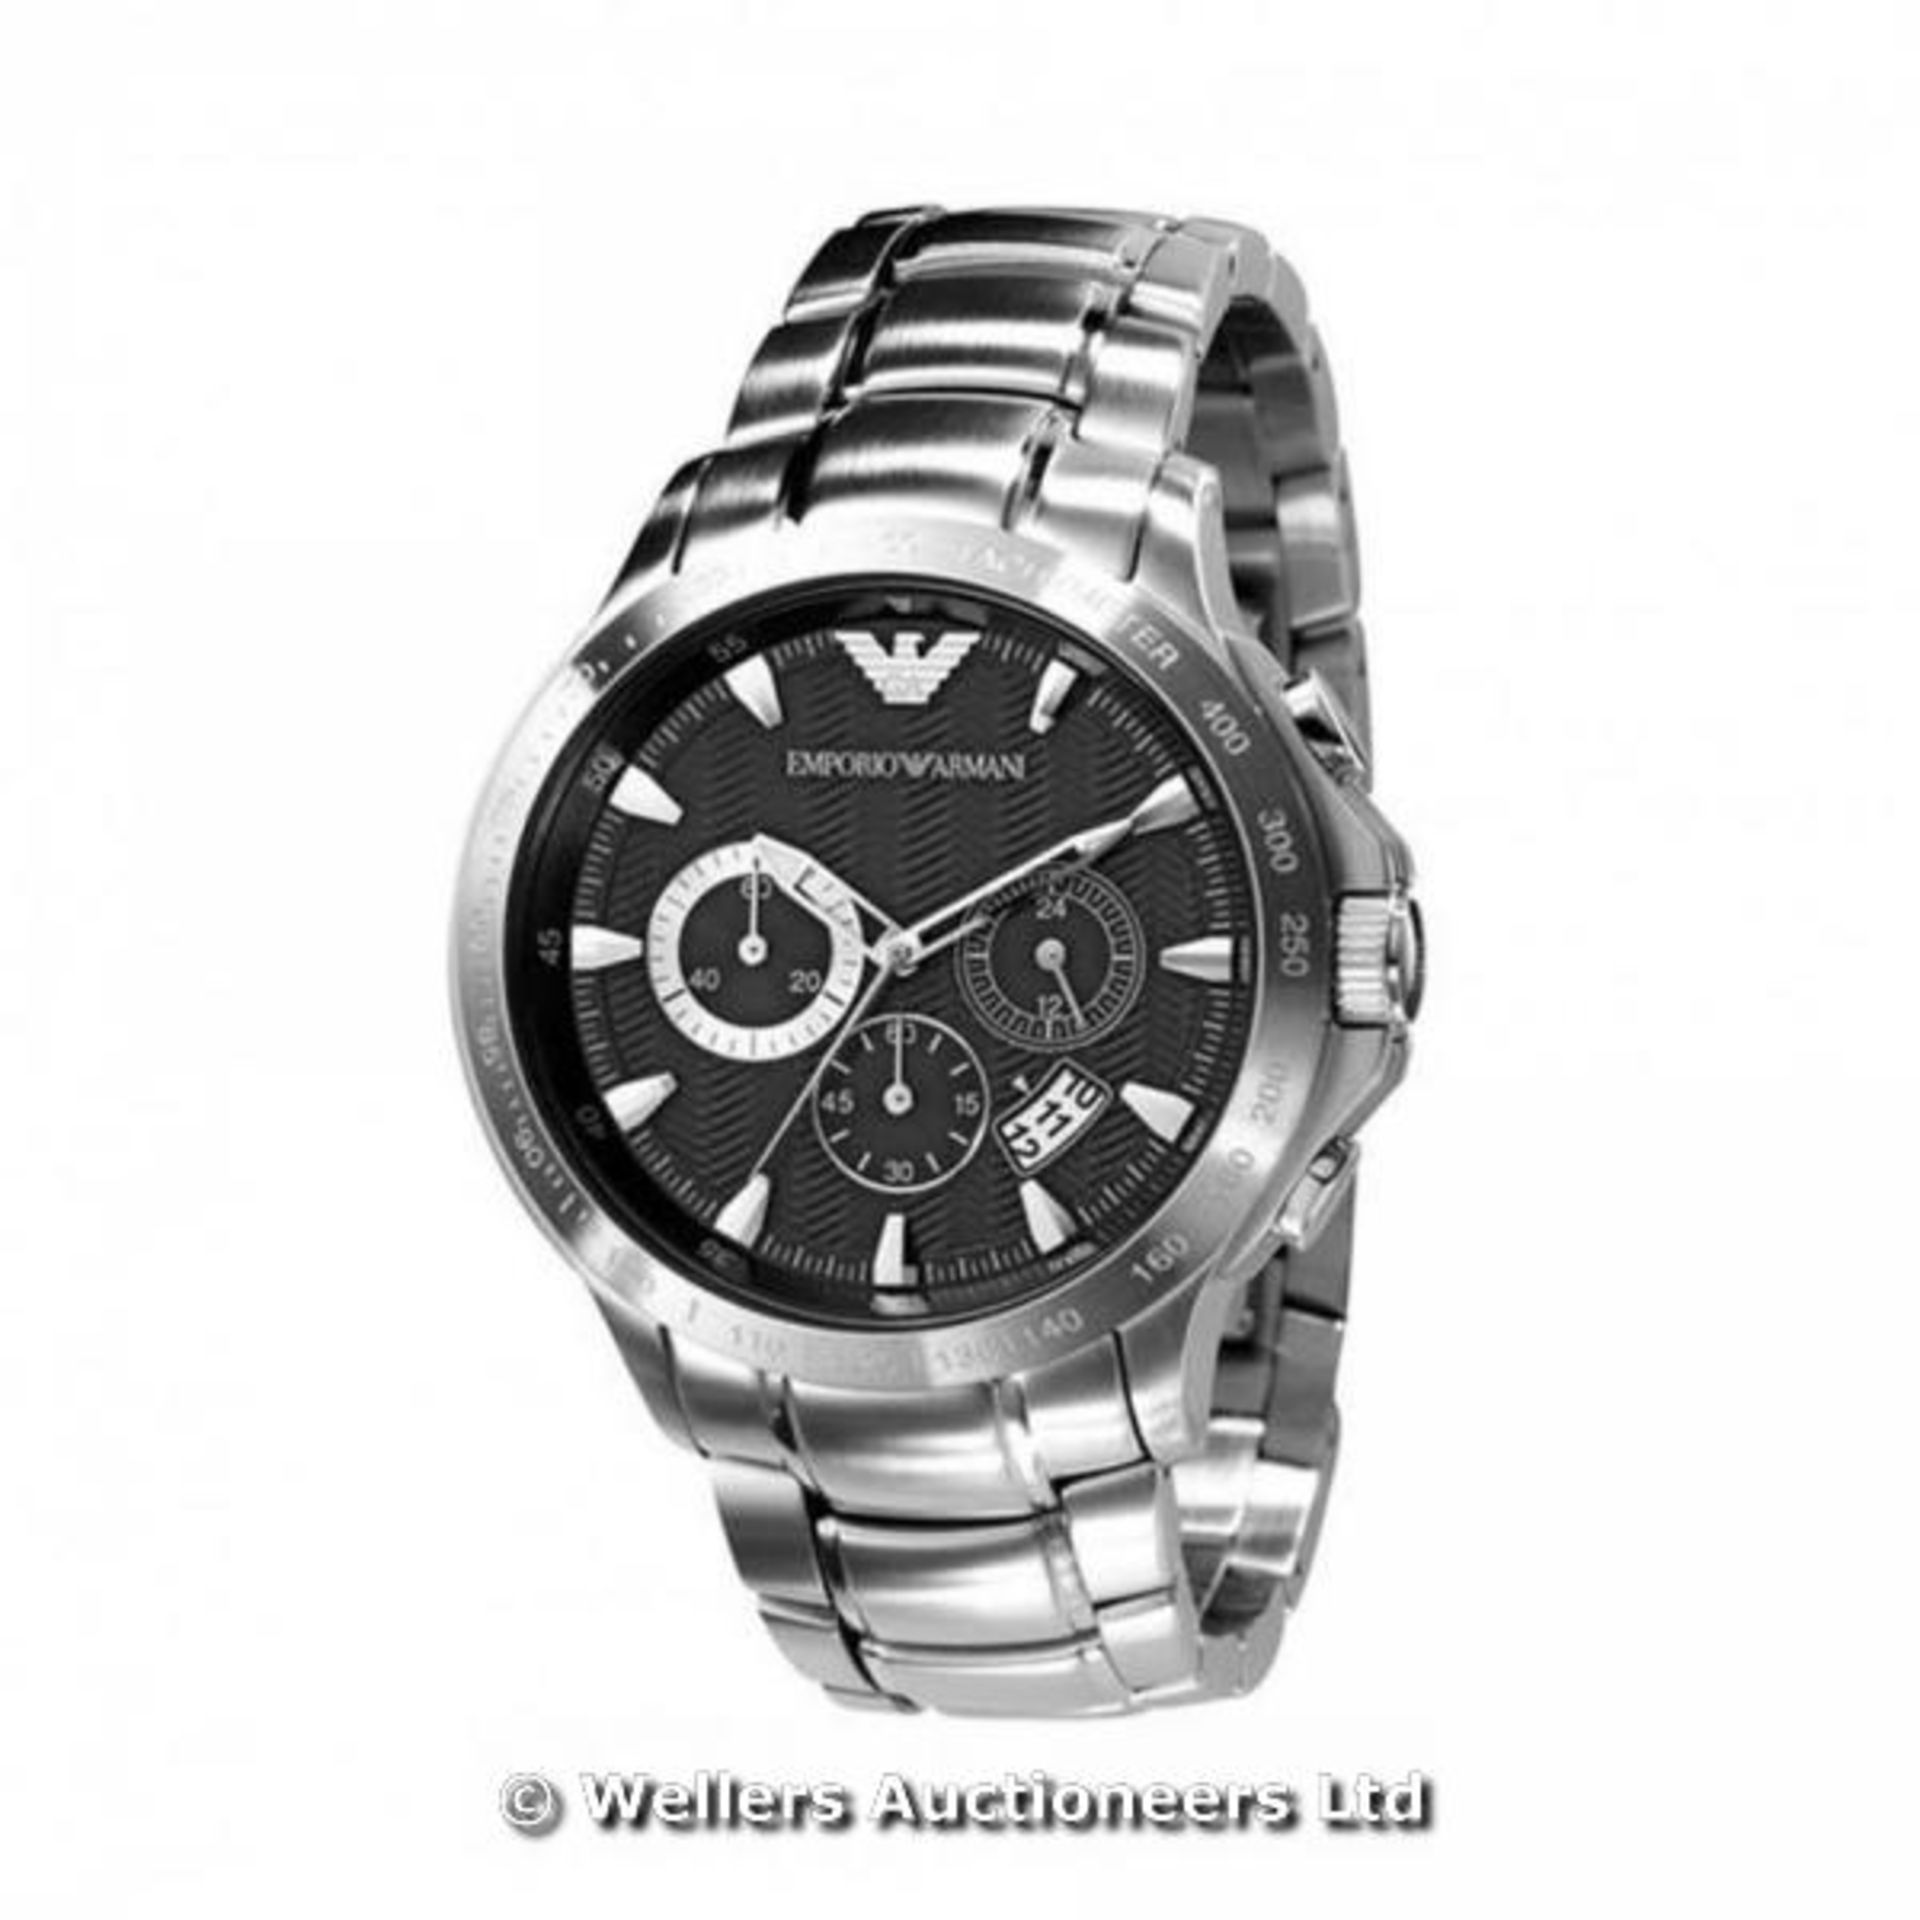 EMPORIO ARMANI AR0636 POLISHED GENTS BRACELET WATCH WITH BLACK CIRCULAR DIAL - RRP £350 (THERE IS NO